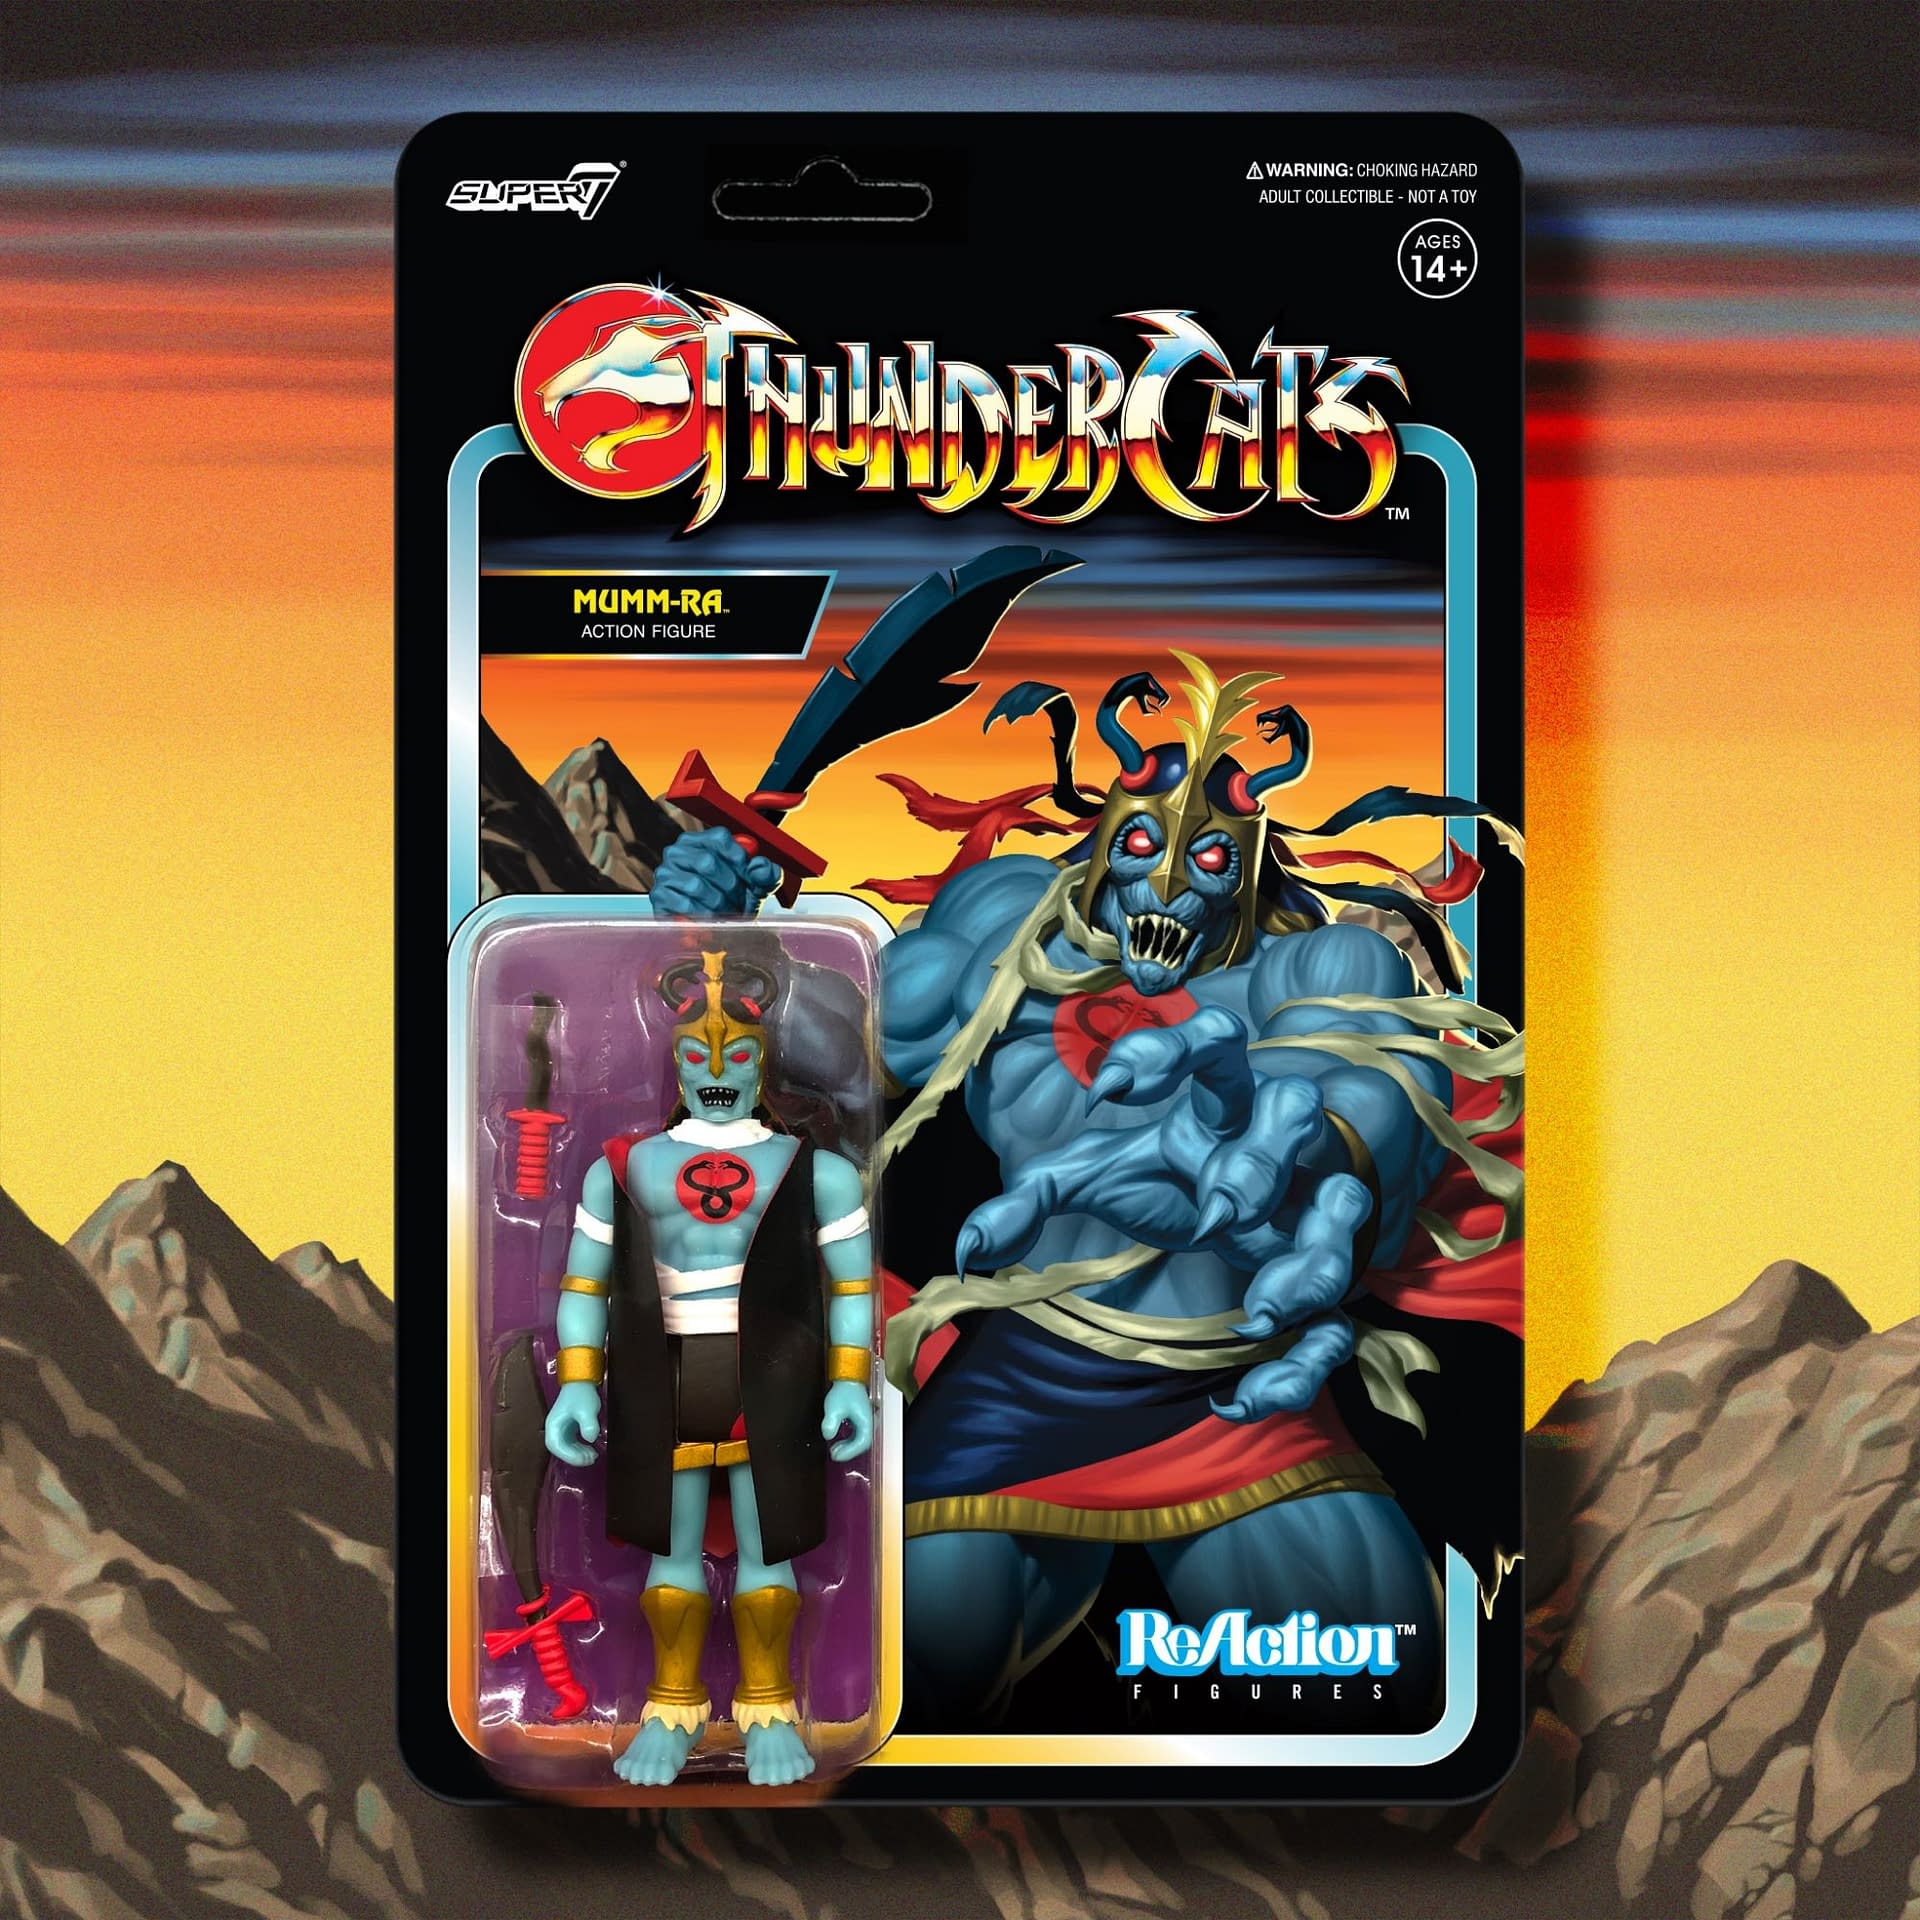 Thundercats ReAction Figures Wave 1 Now Available From Super7